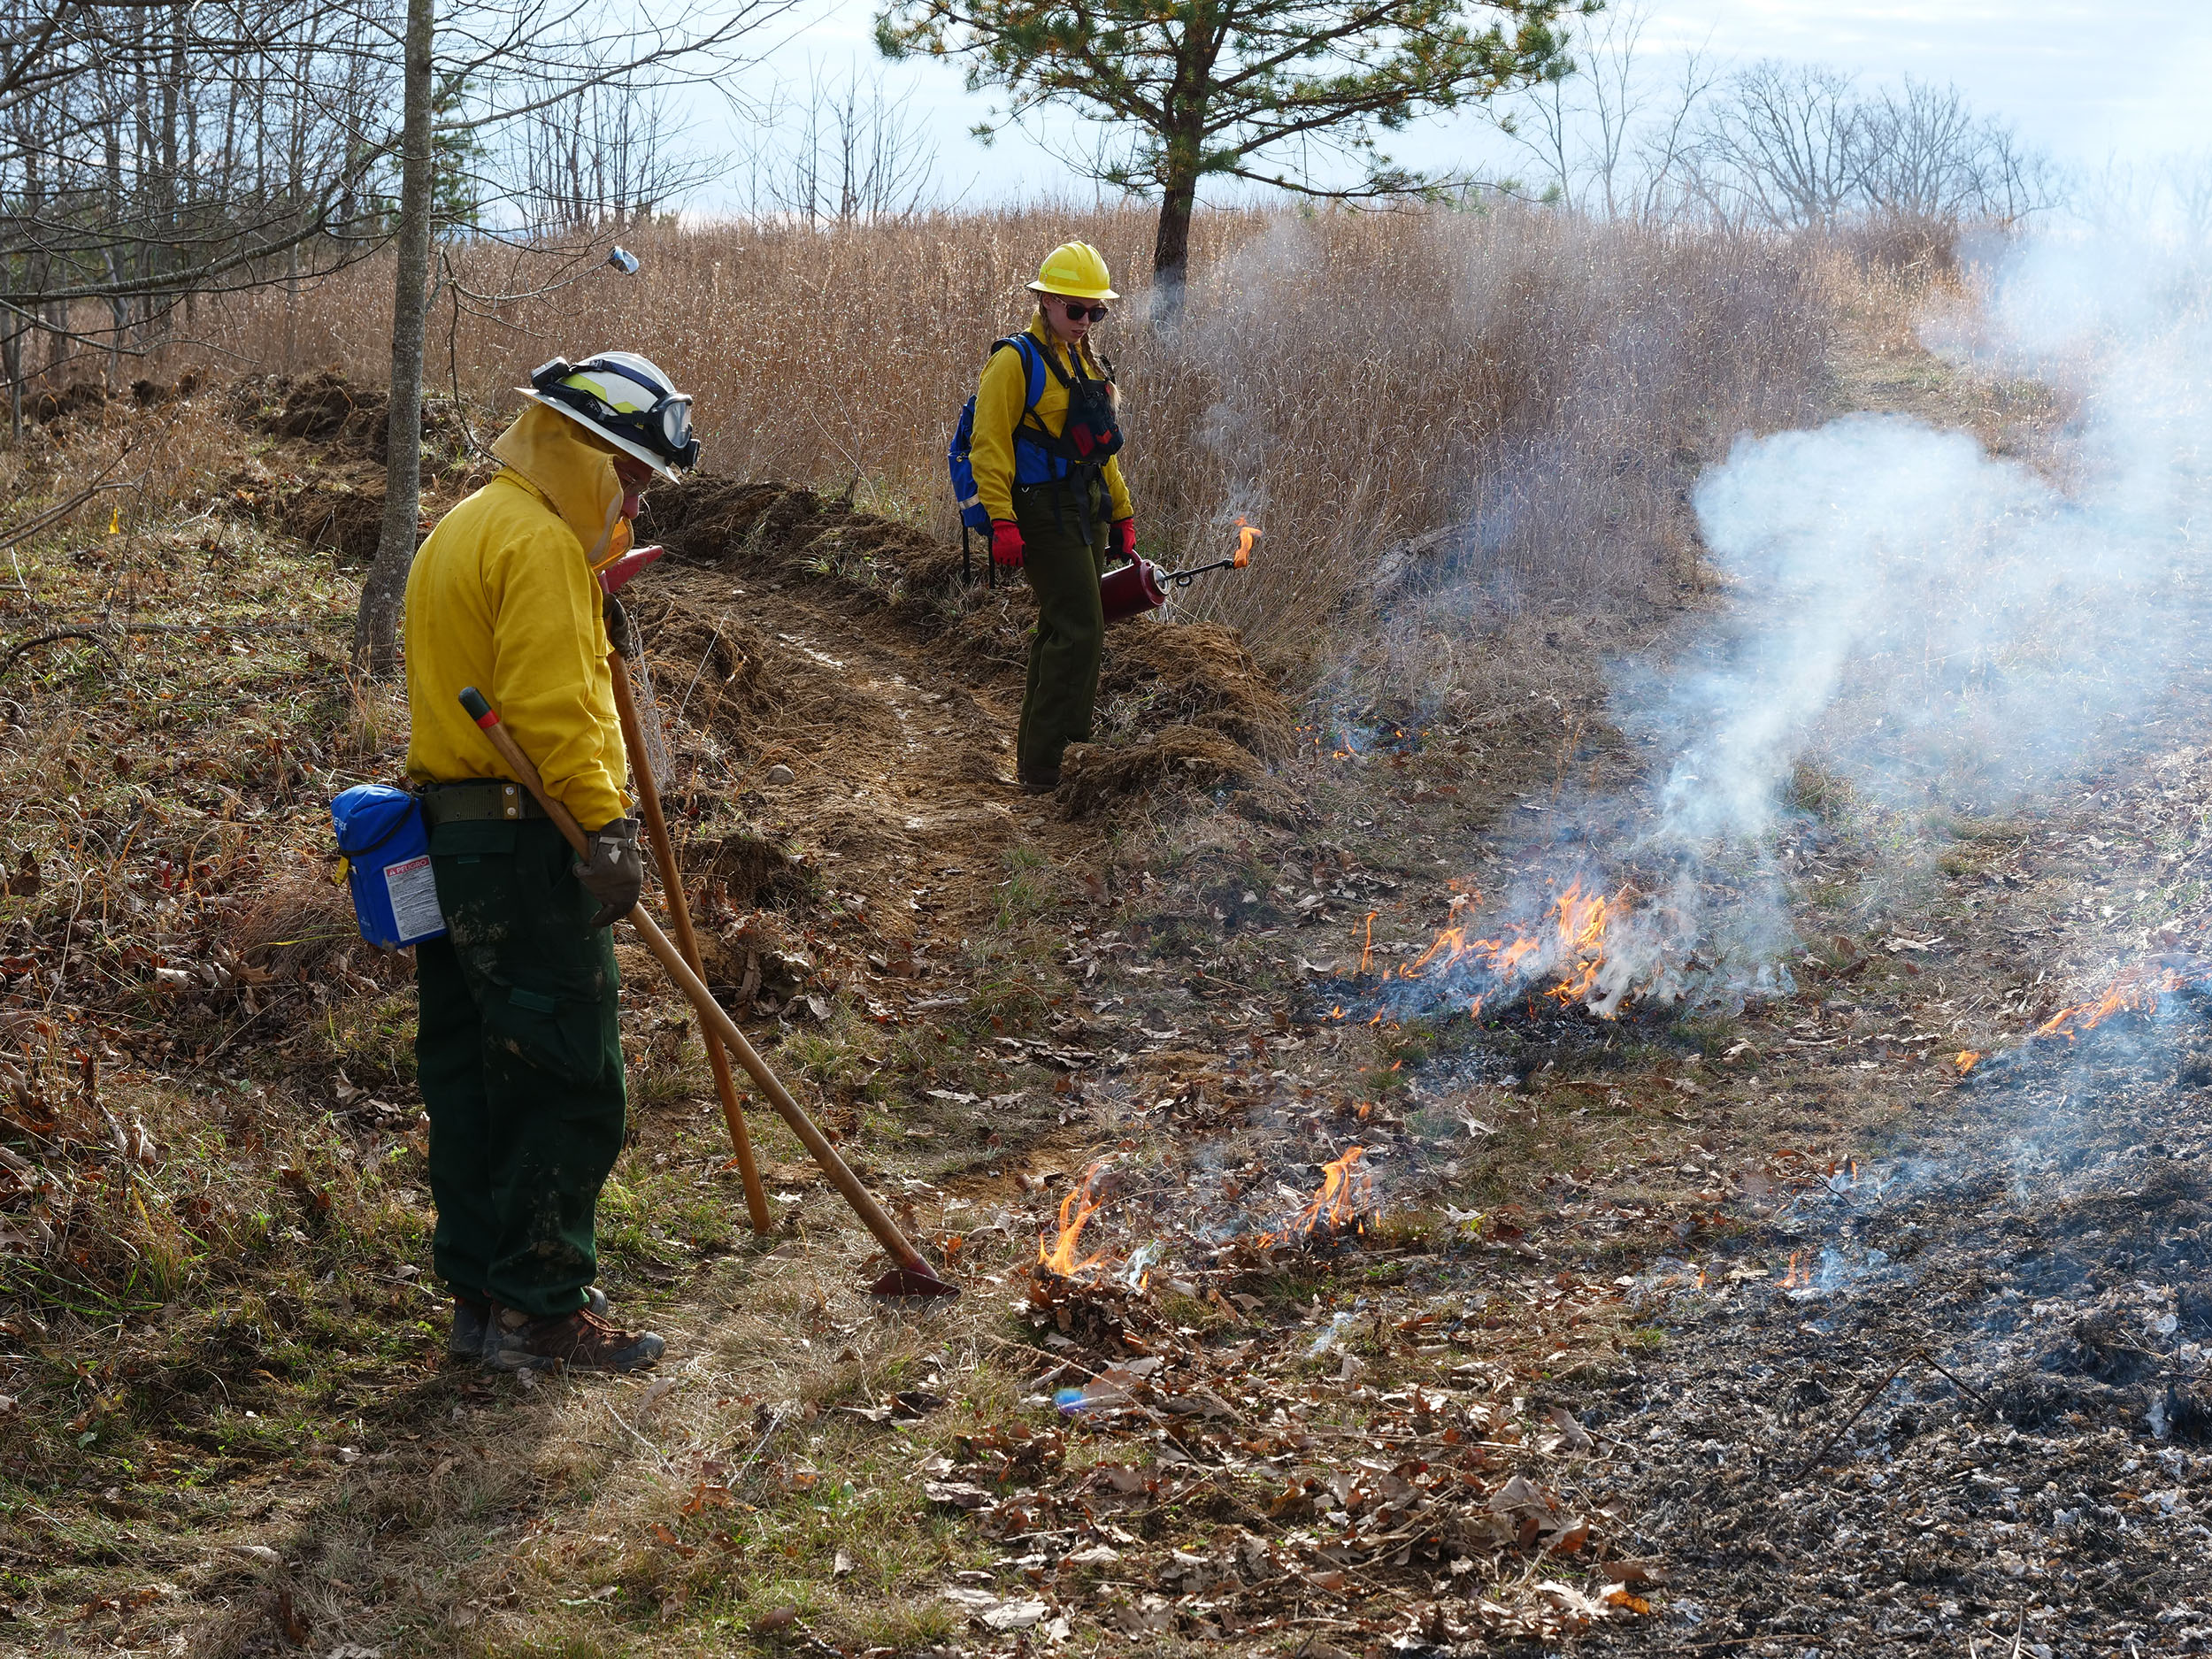 Dennis McCarthy (left) of the Virginia Department of Forestry advises student Emily Newcombe on techniques for igniting along the fire perimeter